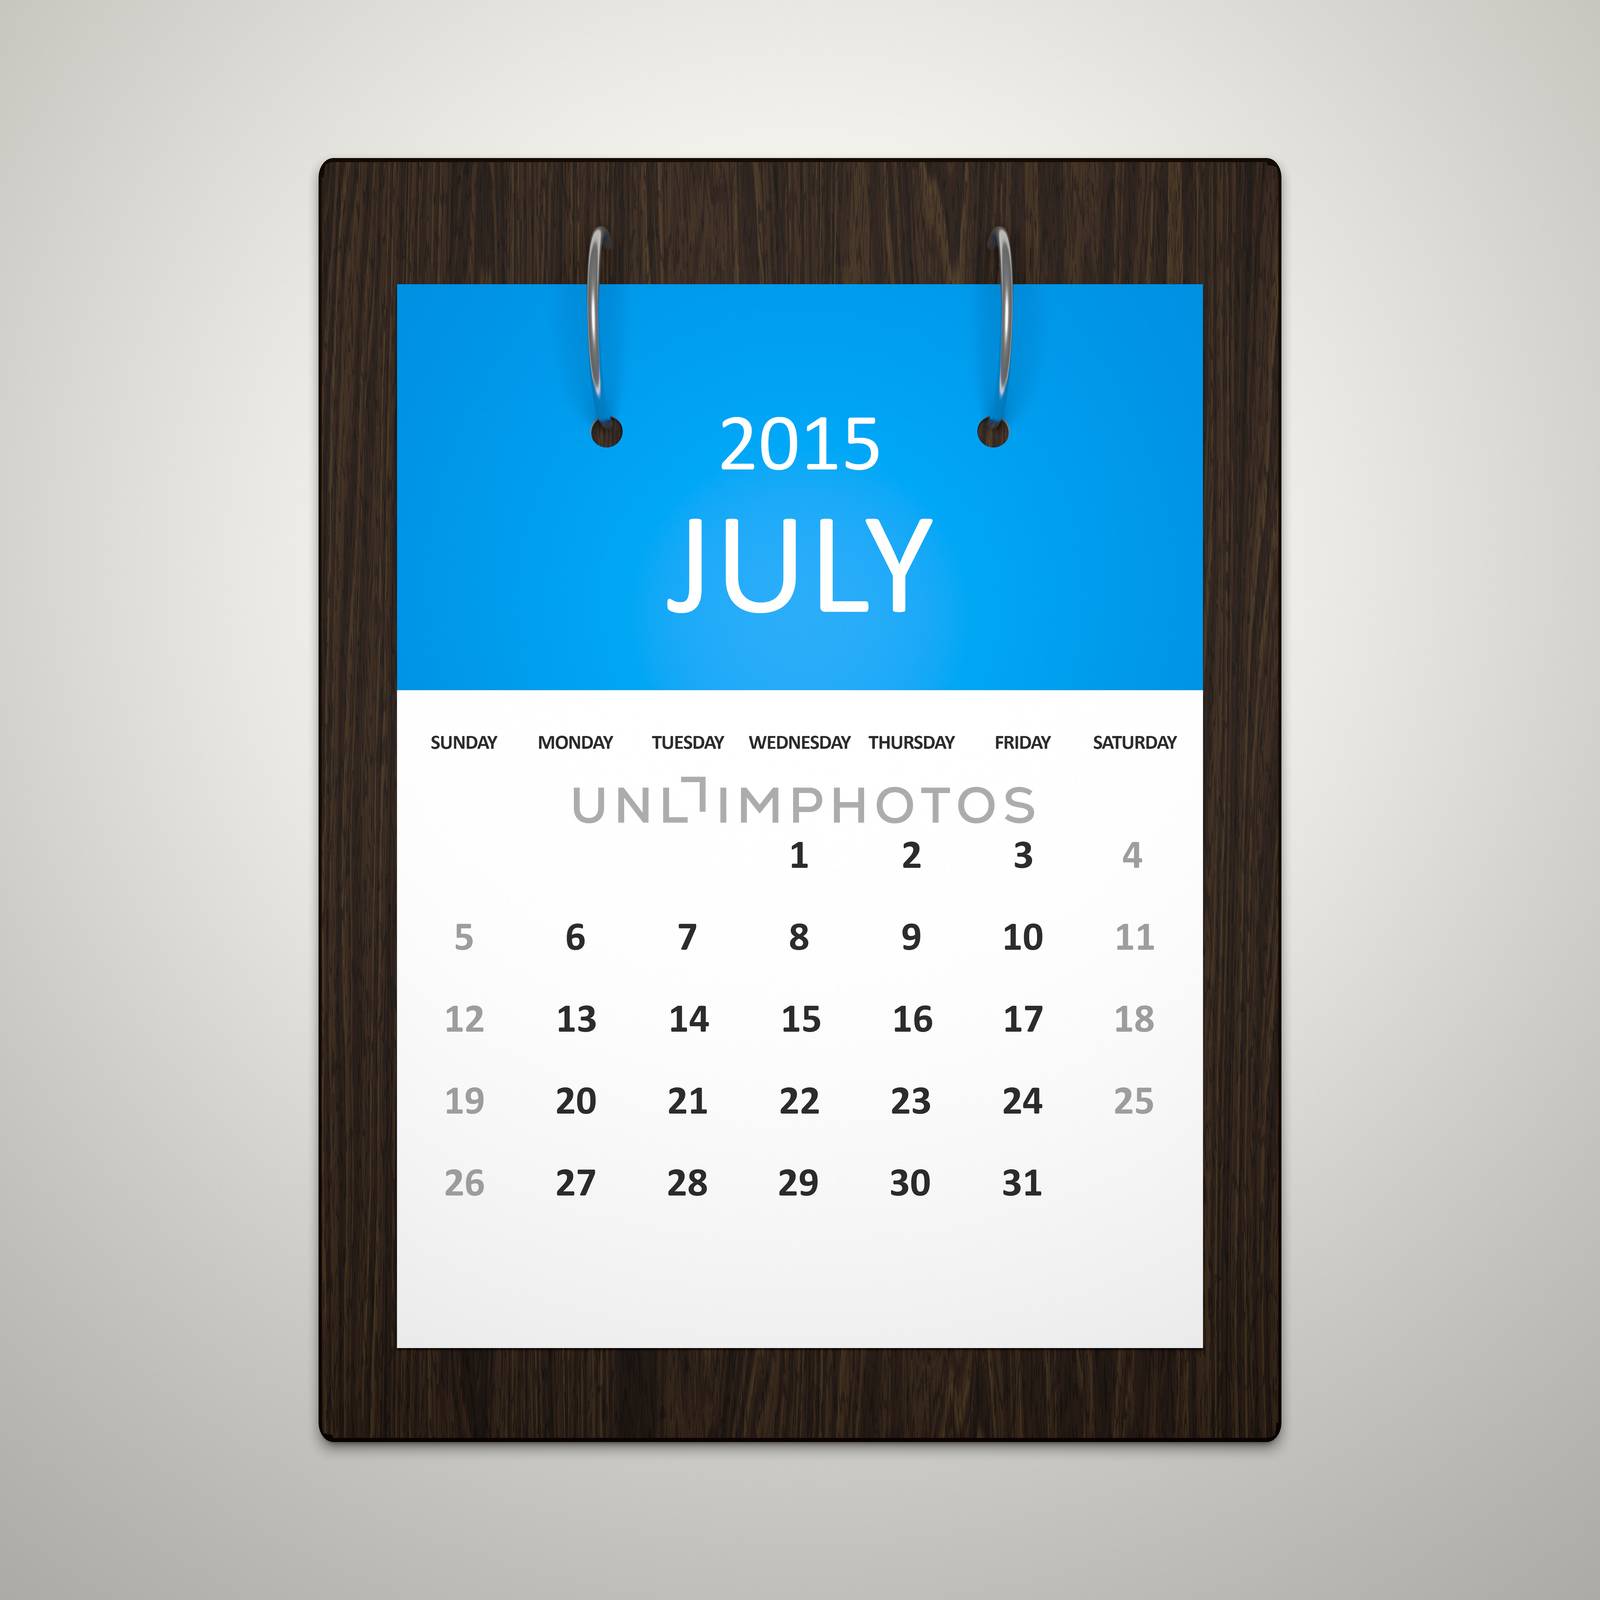 An image of a stylish calendar for event planning July 2015